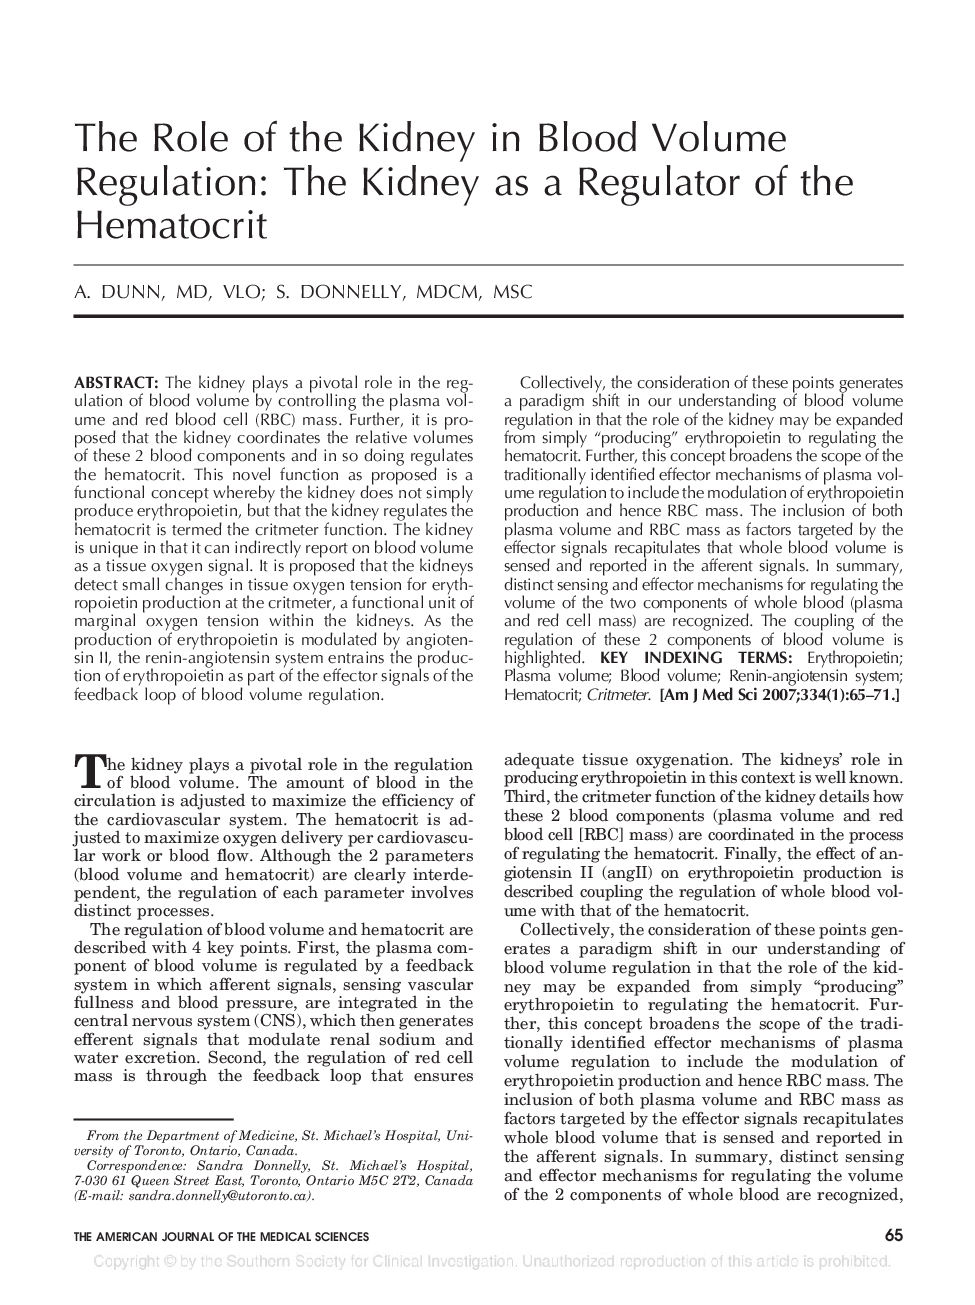 The Role of the Kidney in Blood Volume Regulation: The Kidney as a Regulator of the Hematocrit